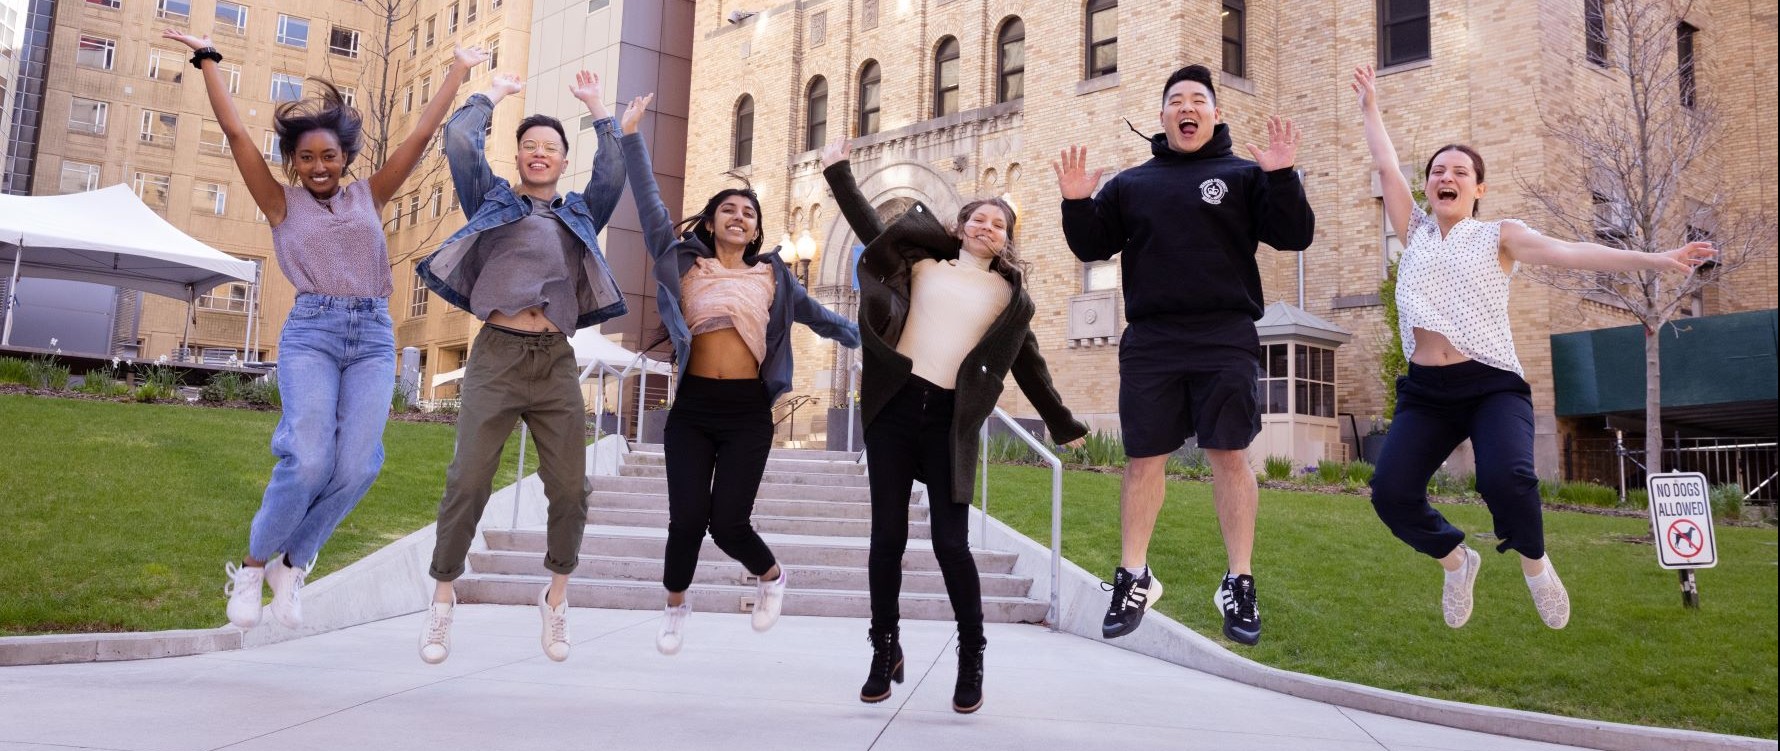 students jumping and posing for a photo in front of the Mailman School of Public Health